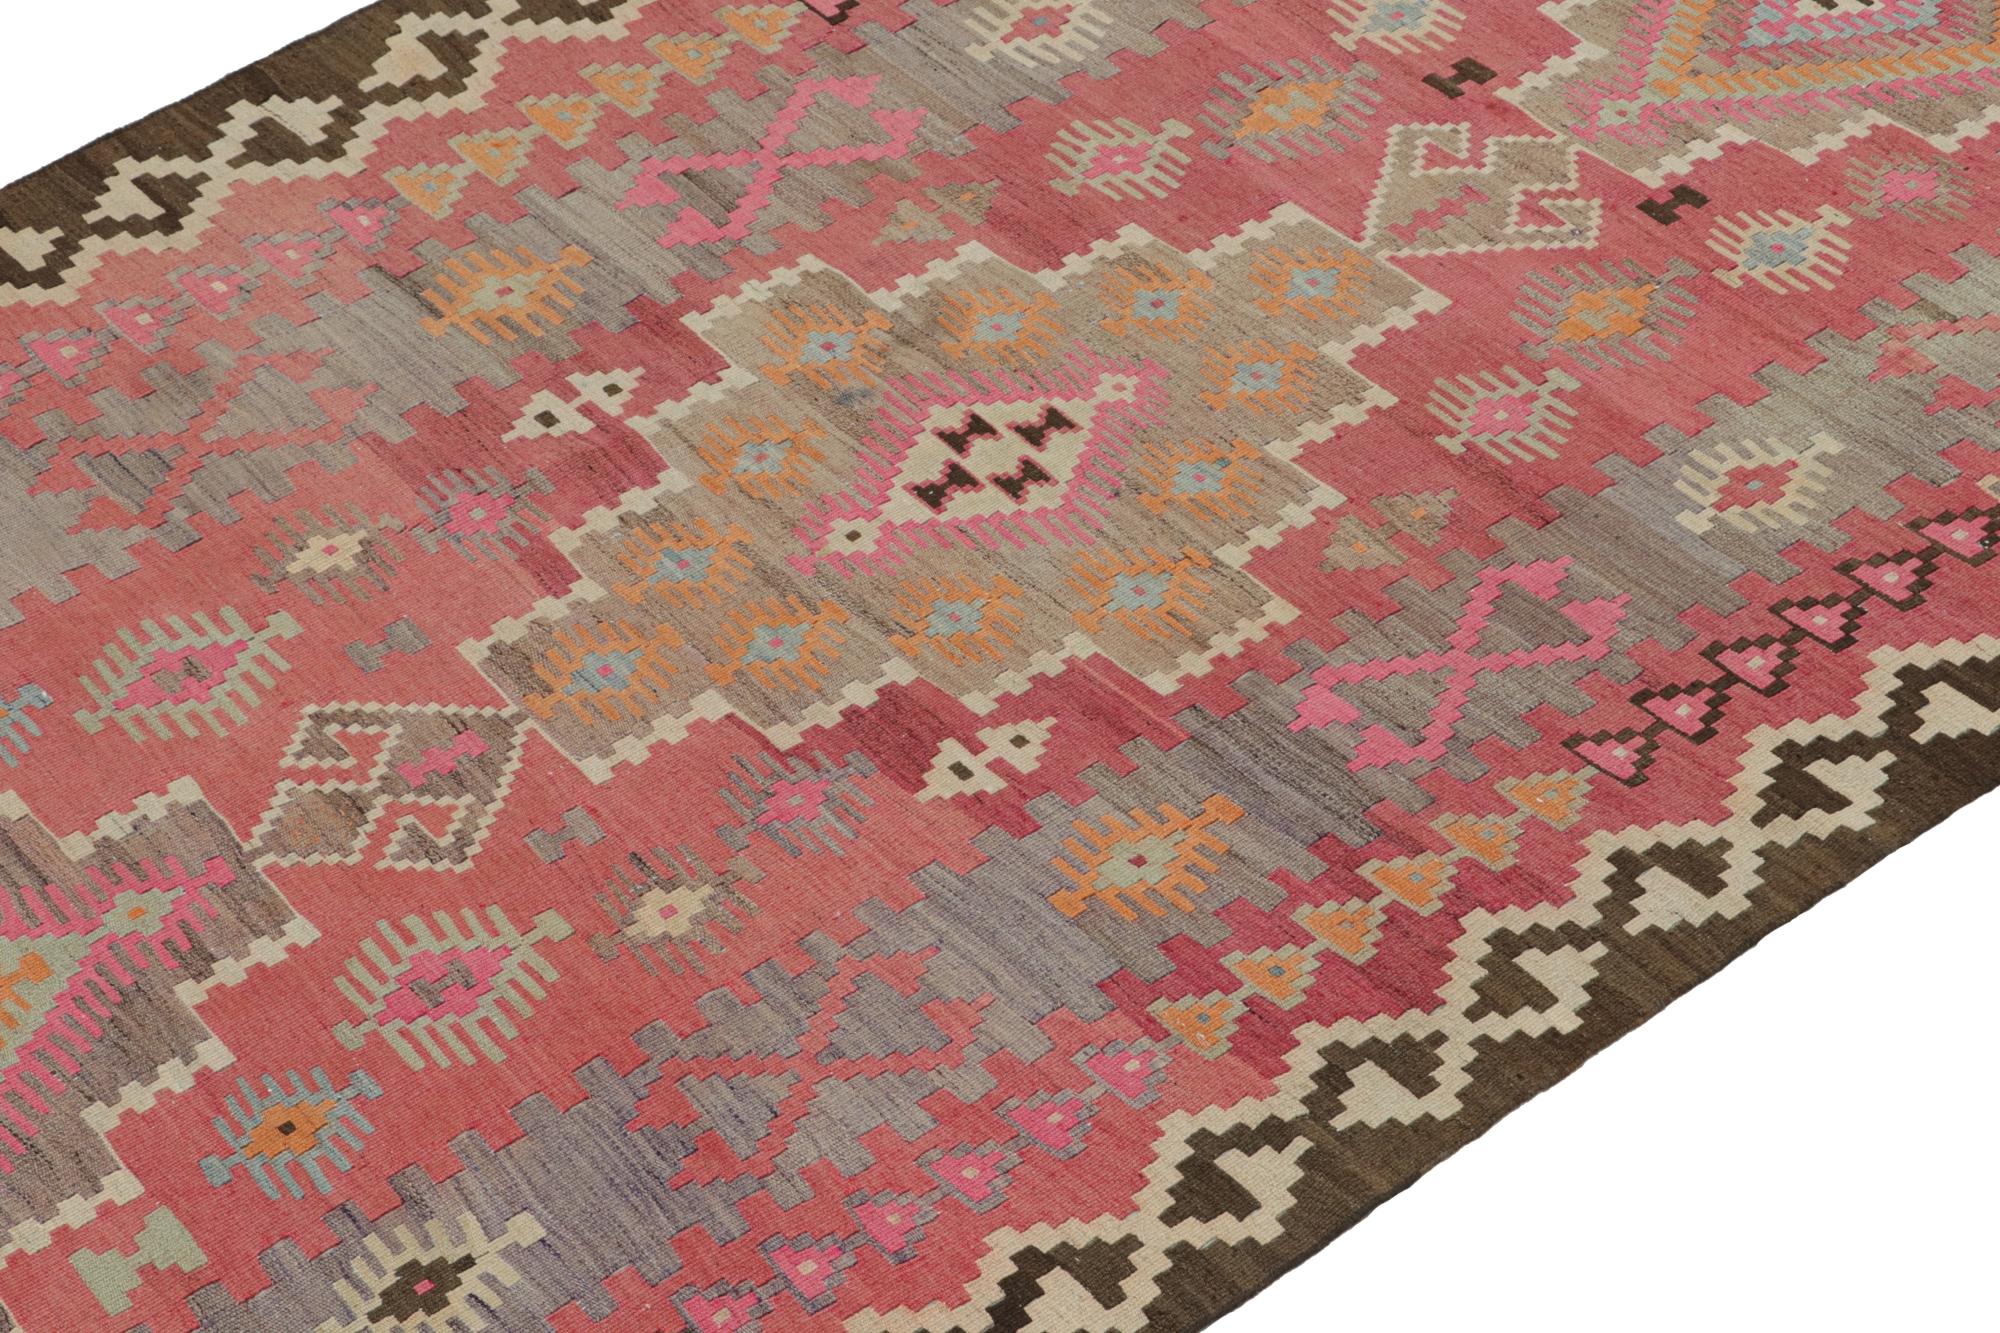 This vintage 5x12 Persian Kilim is a tribal rug from Meshkin—a small northwestern village known for its fabulous works. Handwoven in wool, it originates circa 1950-1960.

On the Design:

The bold design prefers tribal geometric patterns in